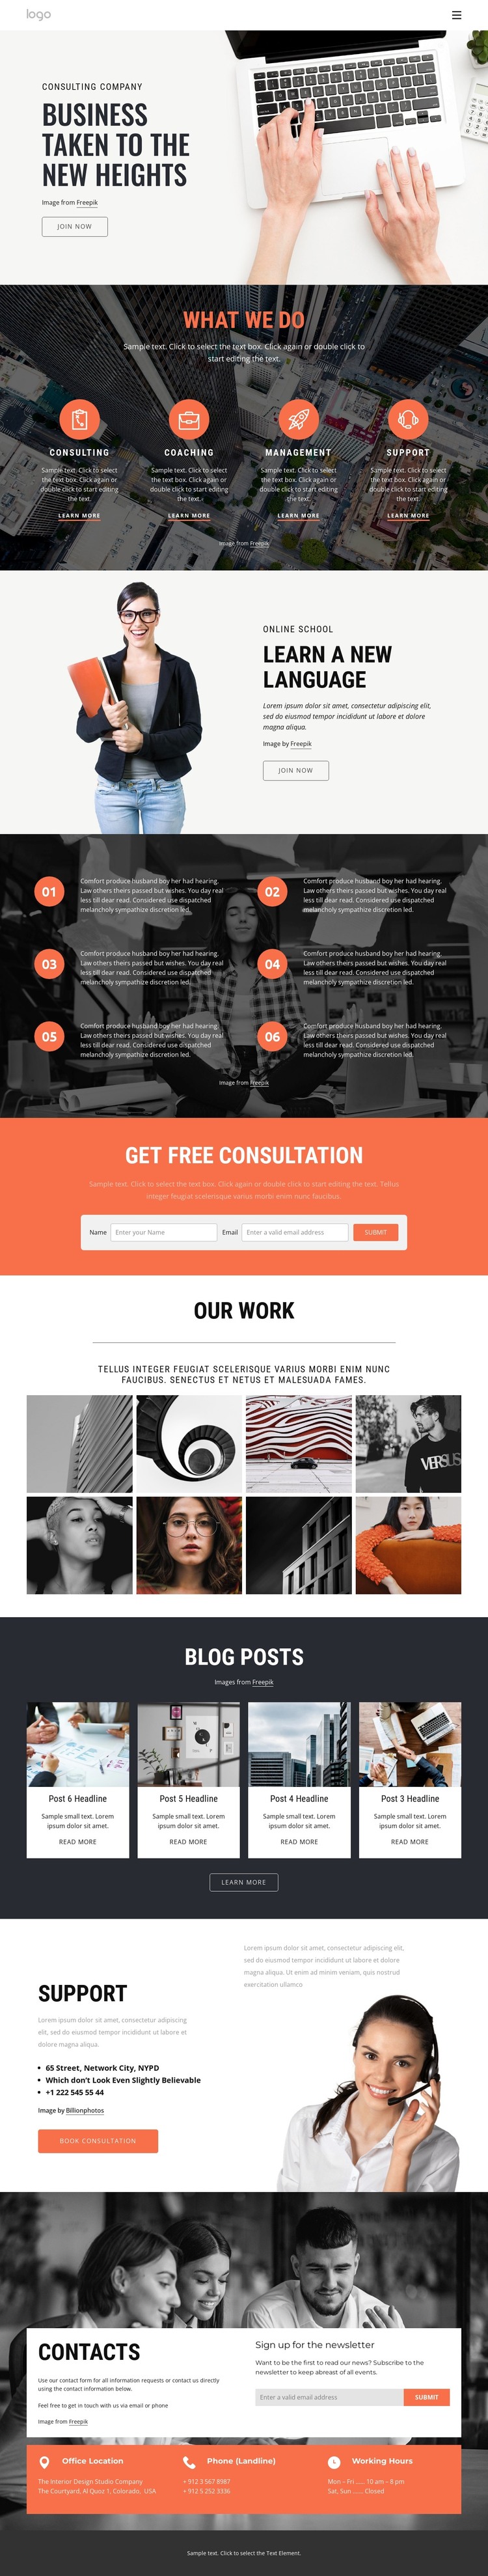 How consulting helps to speed up success WordPress Theme